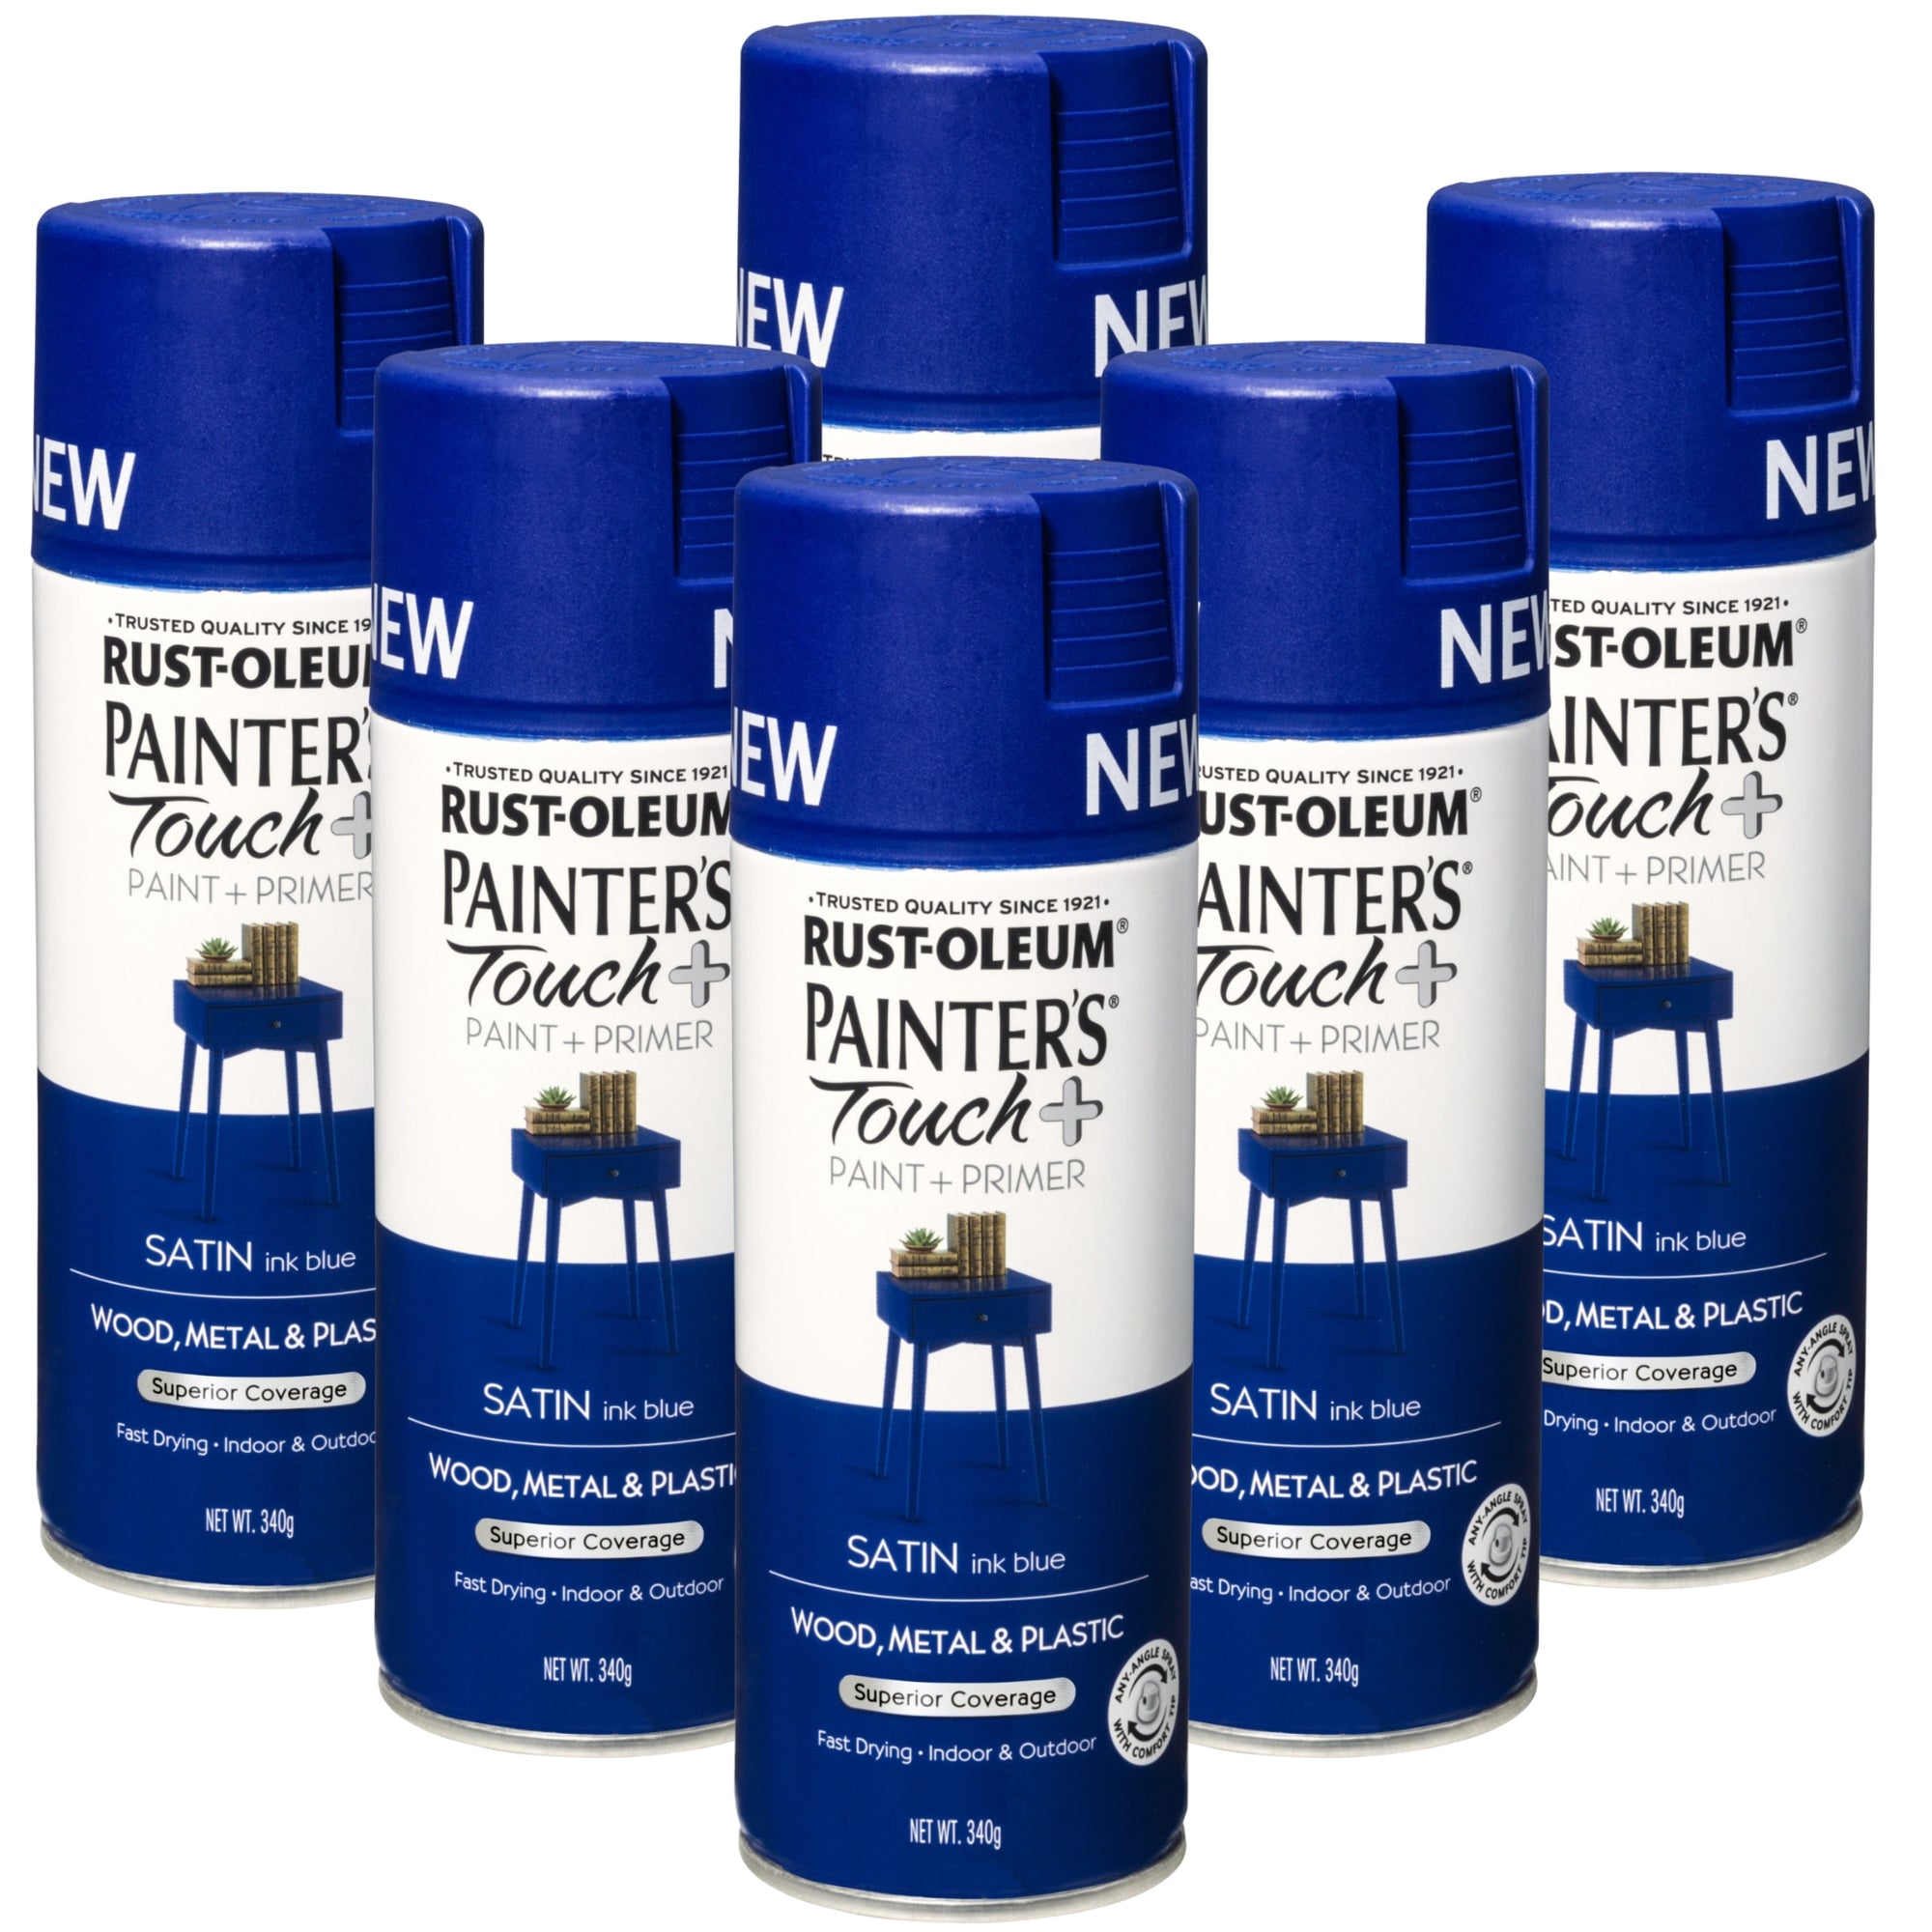 Rust-Oleum Painter's Touch Plus Satin Spray 340g, Satin Ink Blue (6 cans) - South East Clearance Centre